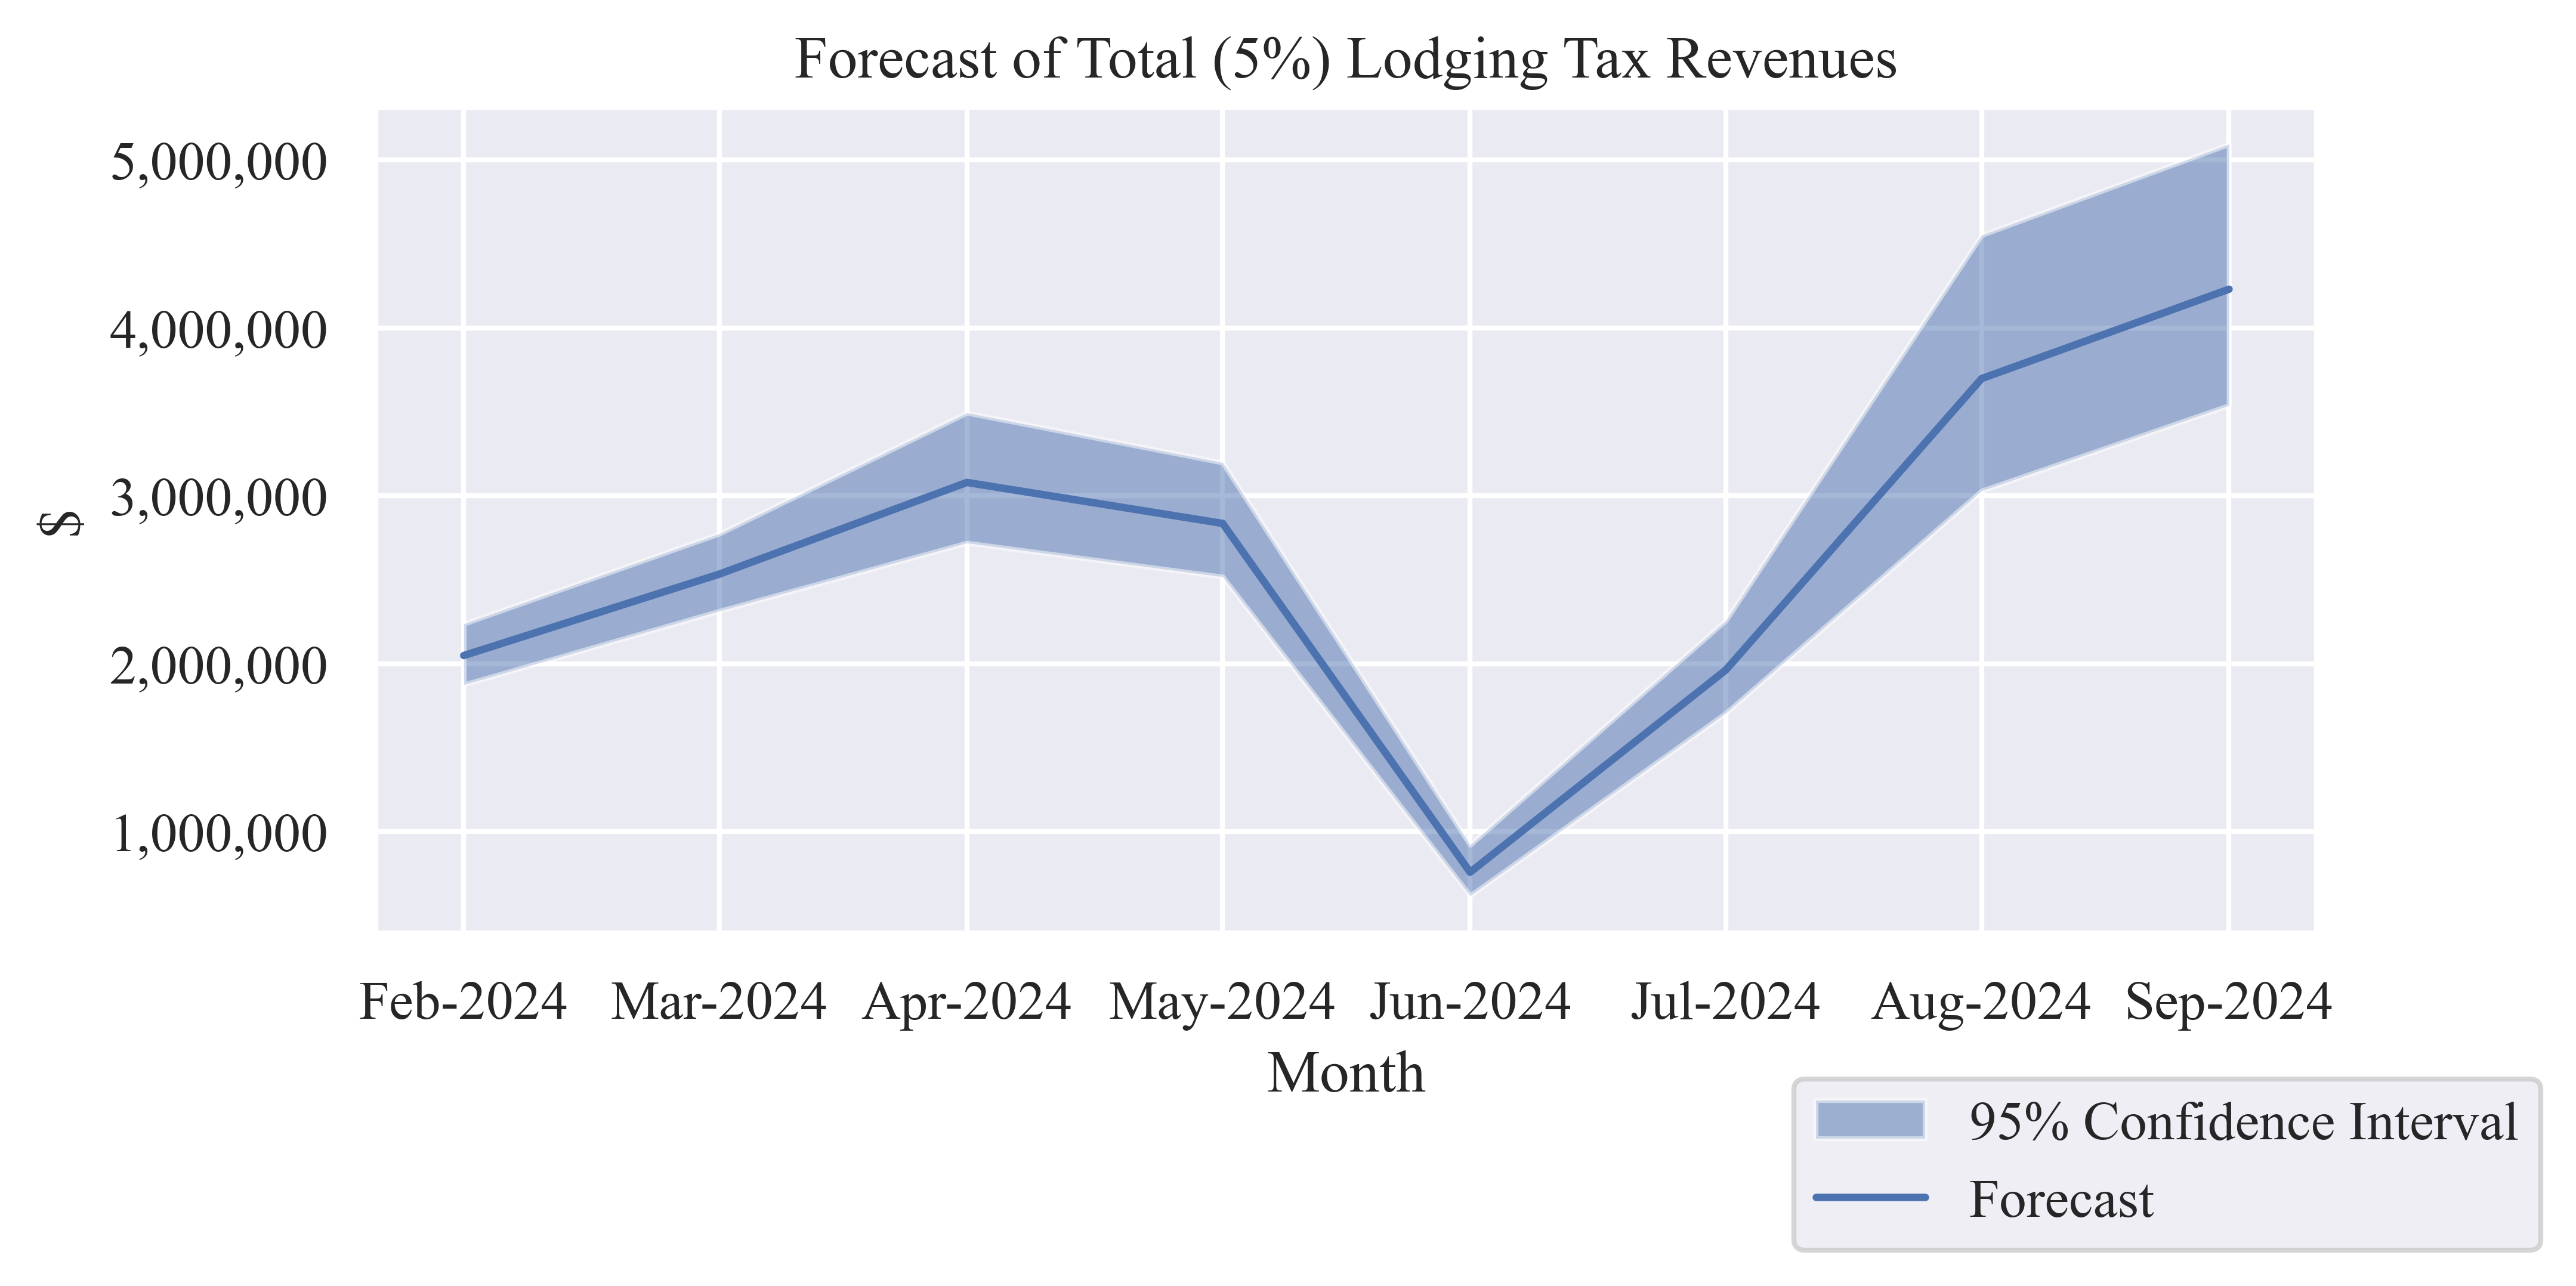 Forecast of Monthly Total (5%) Lodging Tax Revenue chart